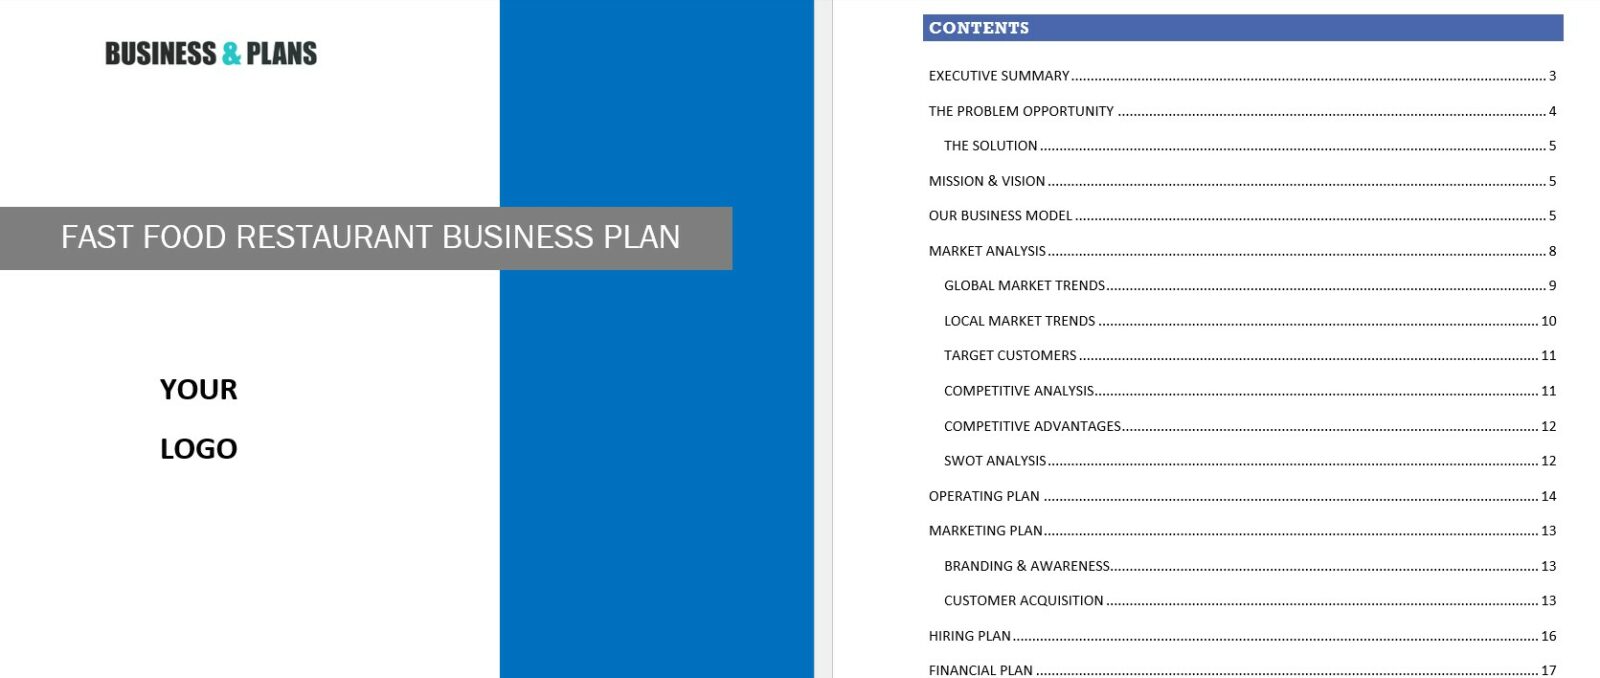 Fast-food business plan template in Word